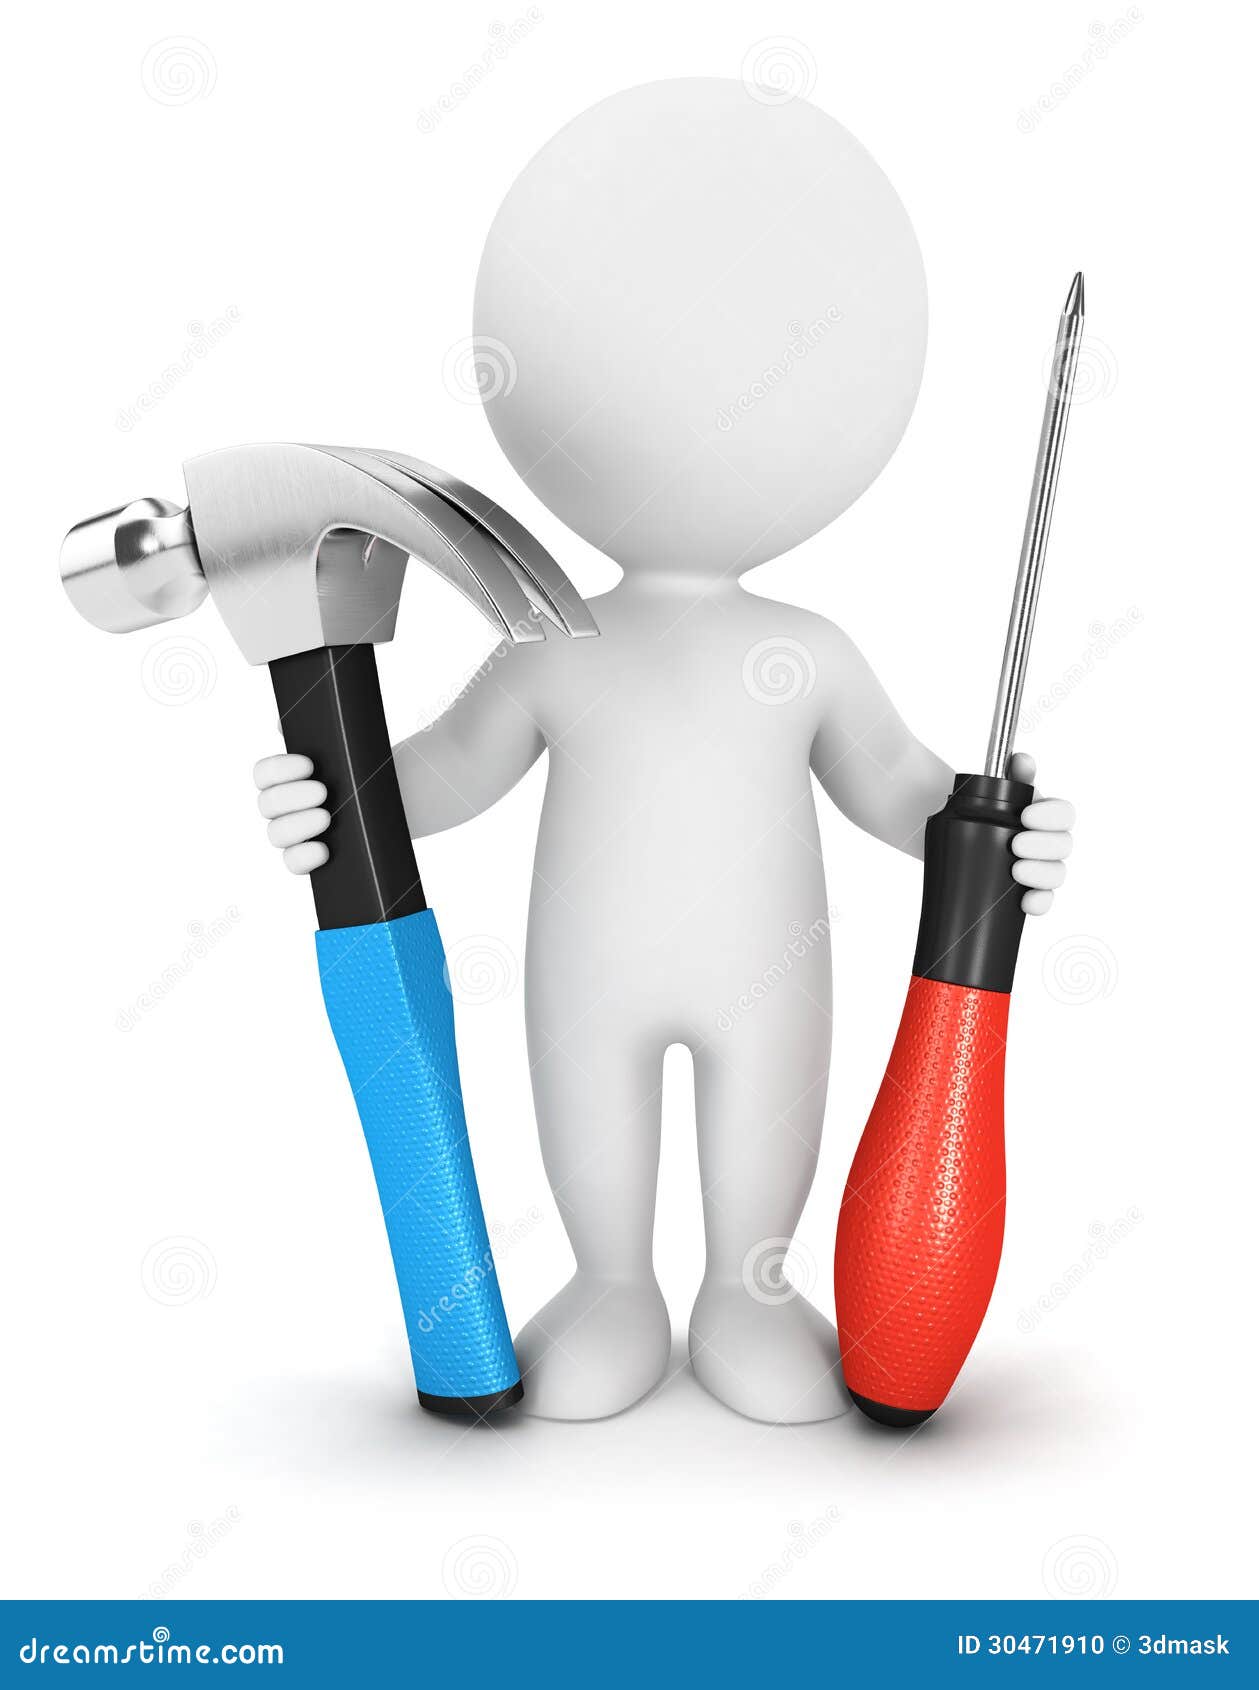 3d White People With Tools Stock Photo - Image: 30471910